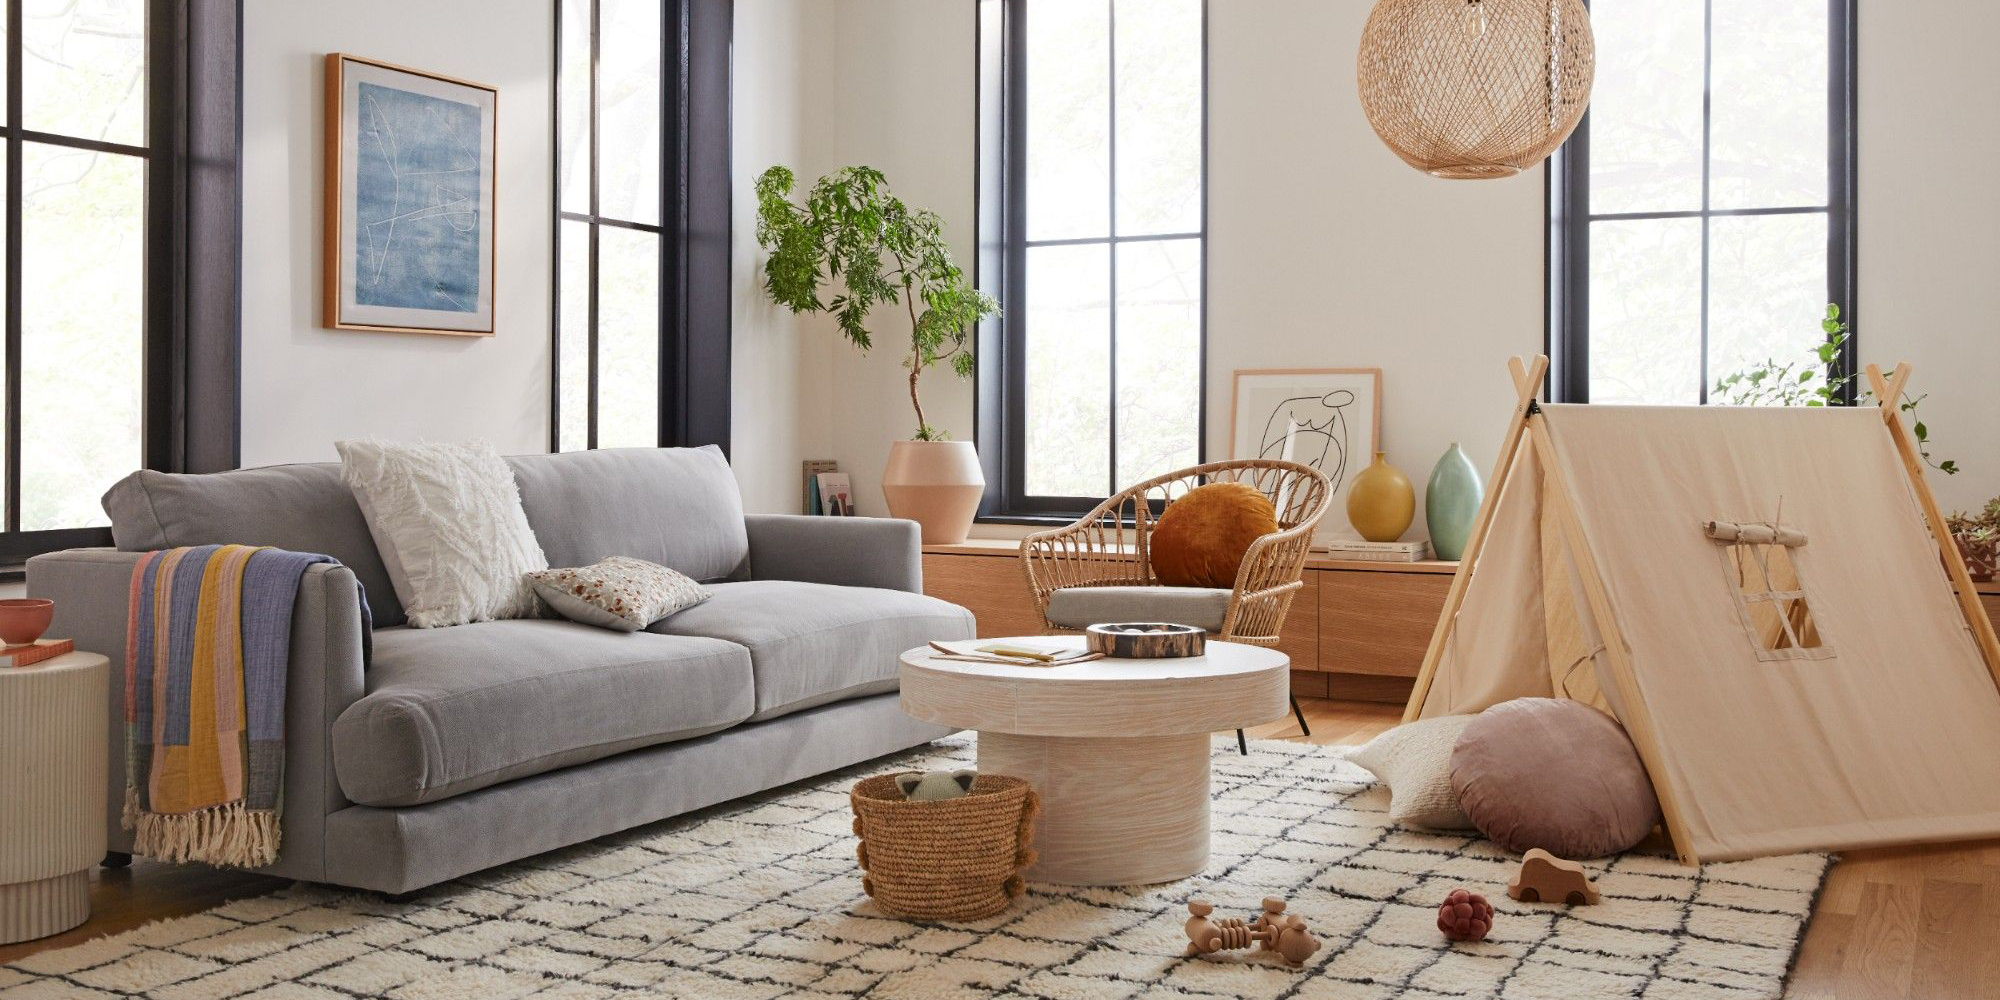 West Elm Kids Essentials: Furnishing for Functionality and Fun插图2